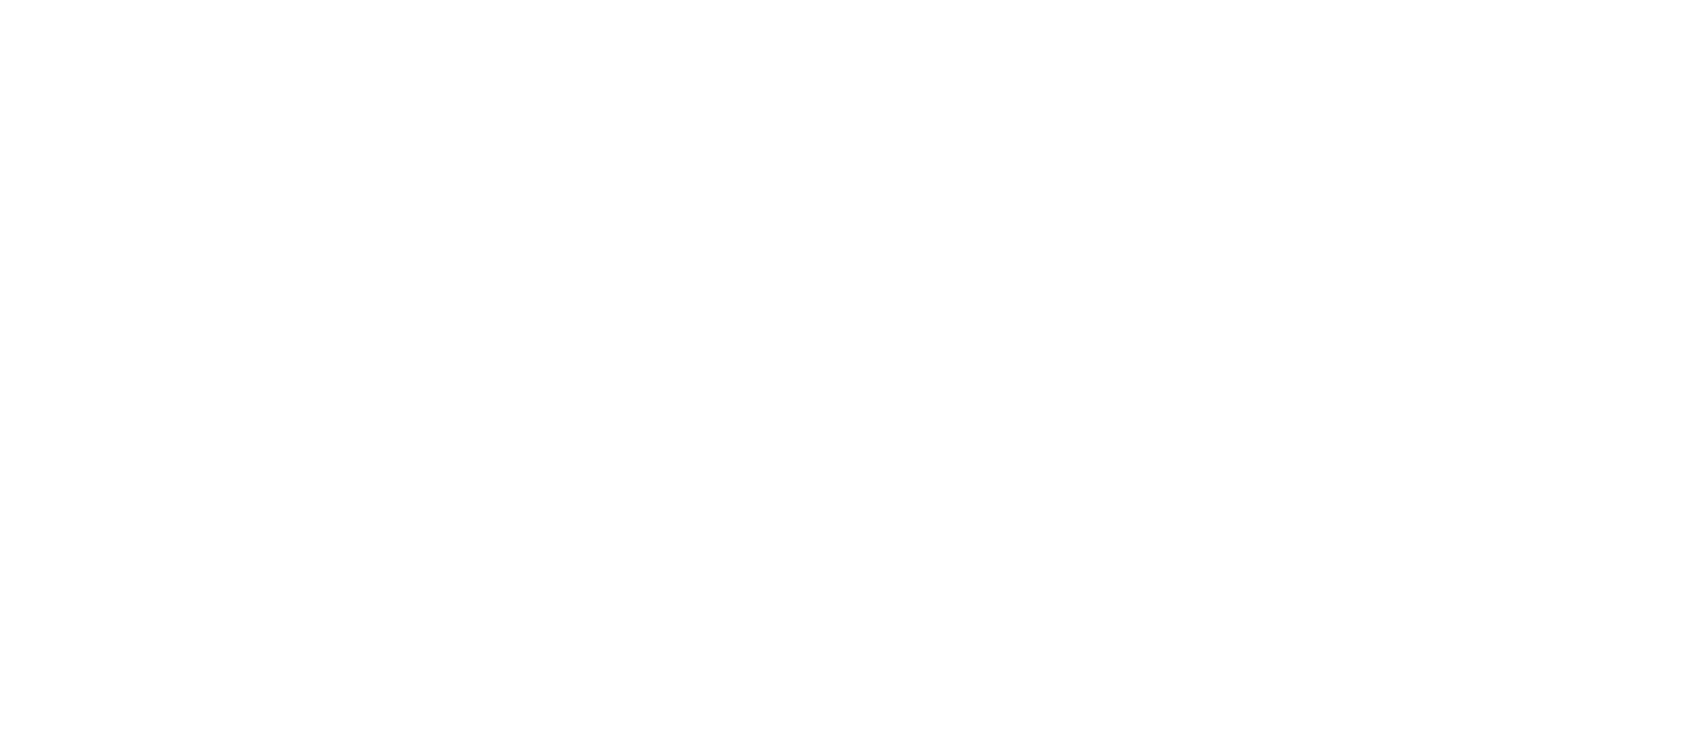 Community supporting youth